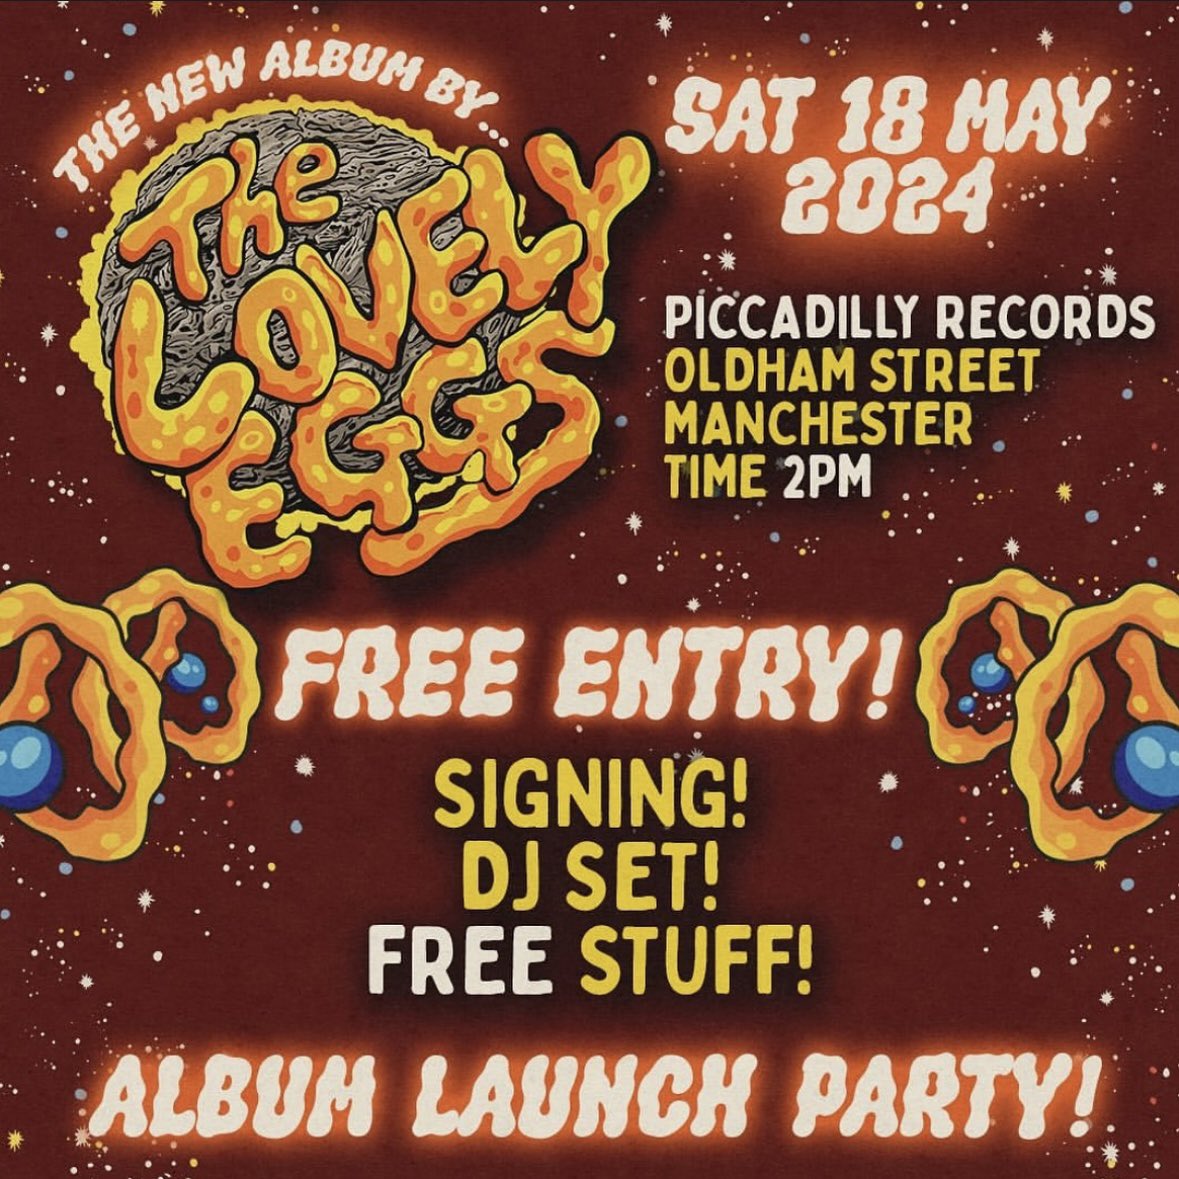 🍳 ALBUM LAUNCH PARTY 🍳 Come and join us on Saturday May 18th from 2pm @nightanddaycafe as we celebrate the launch of the new LP from Picc Recs favourites The Lovely Eggs 🥳 There’ll be a signing session, DJ set and Free Stuff! piccadillyrecords.com/counter/featur… @TheLovelyEggs